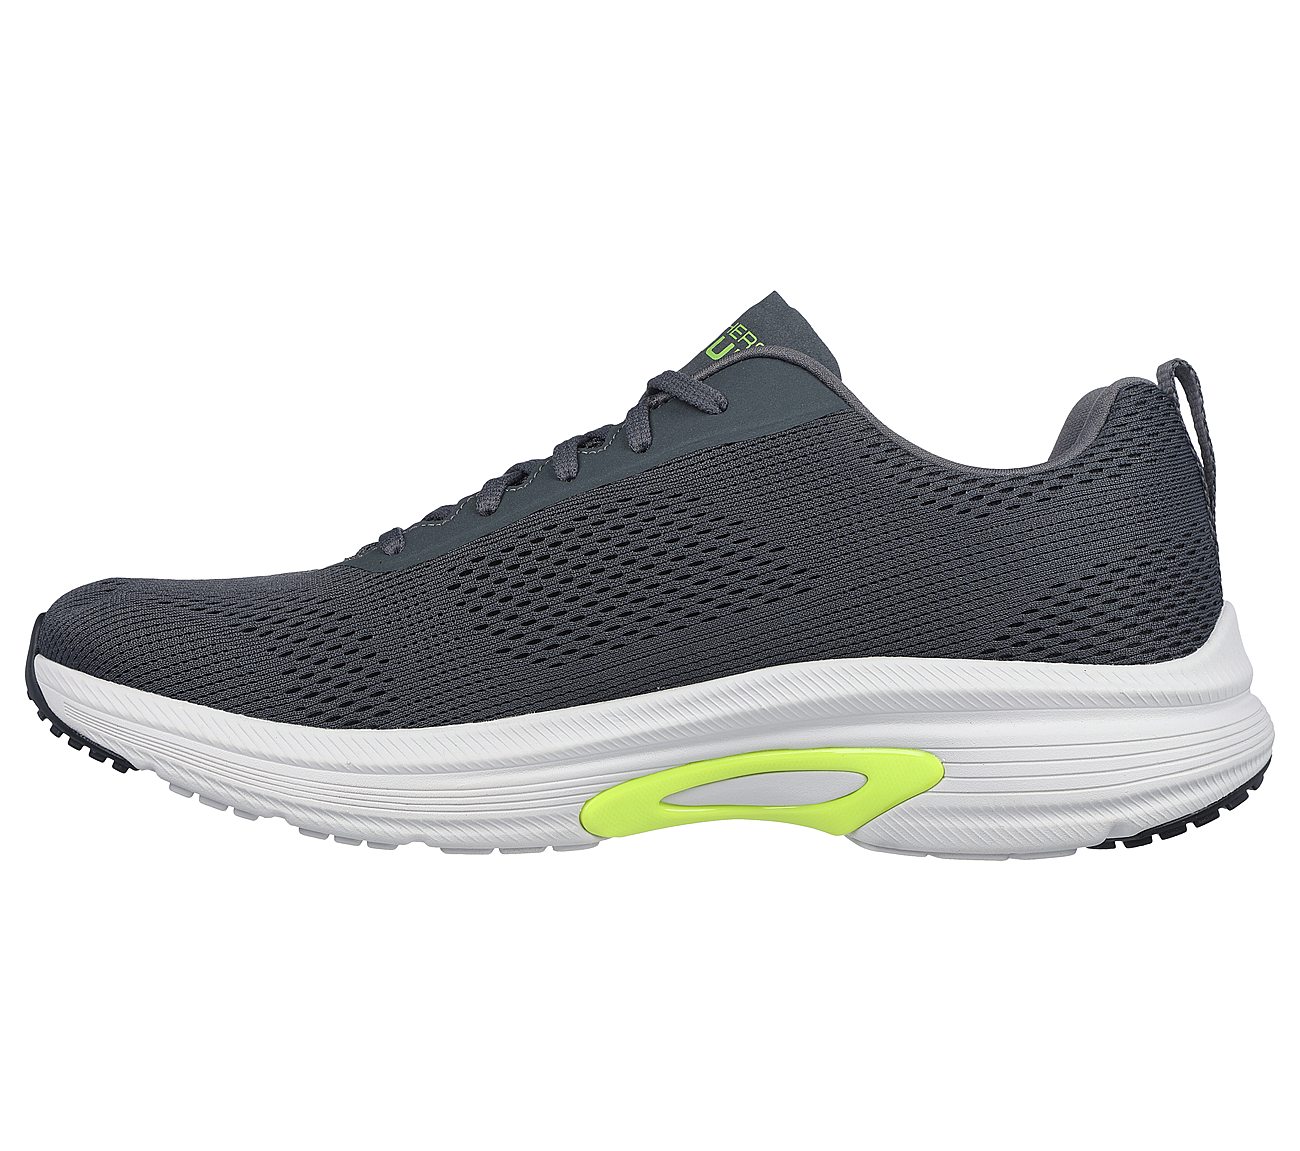 GO RUN ARCH FIT, CHARCOAL/BLACK Footwear Left View